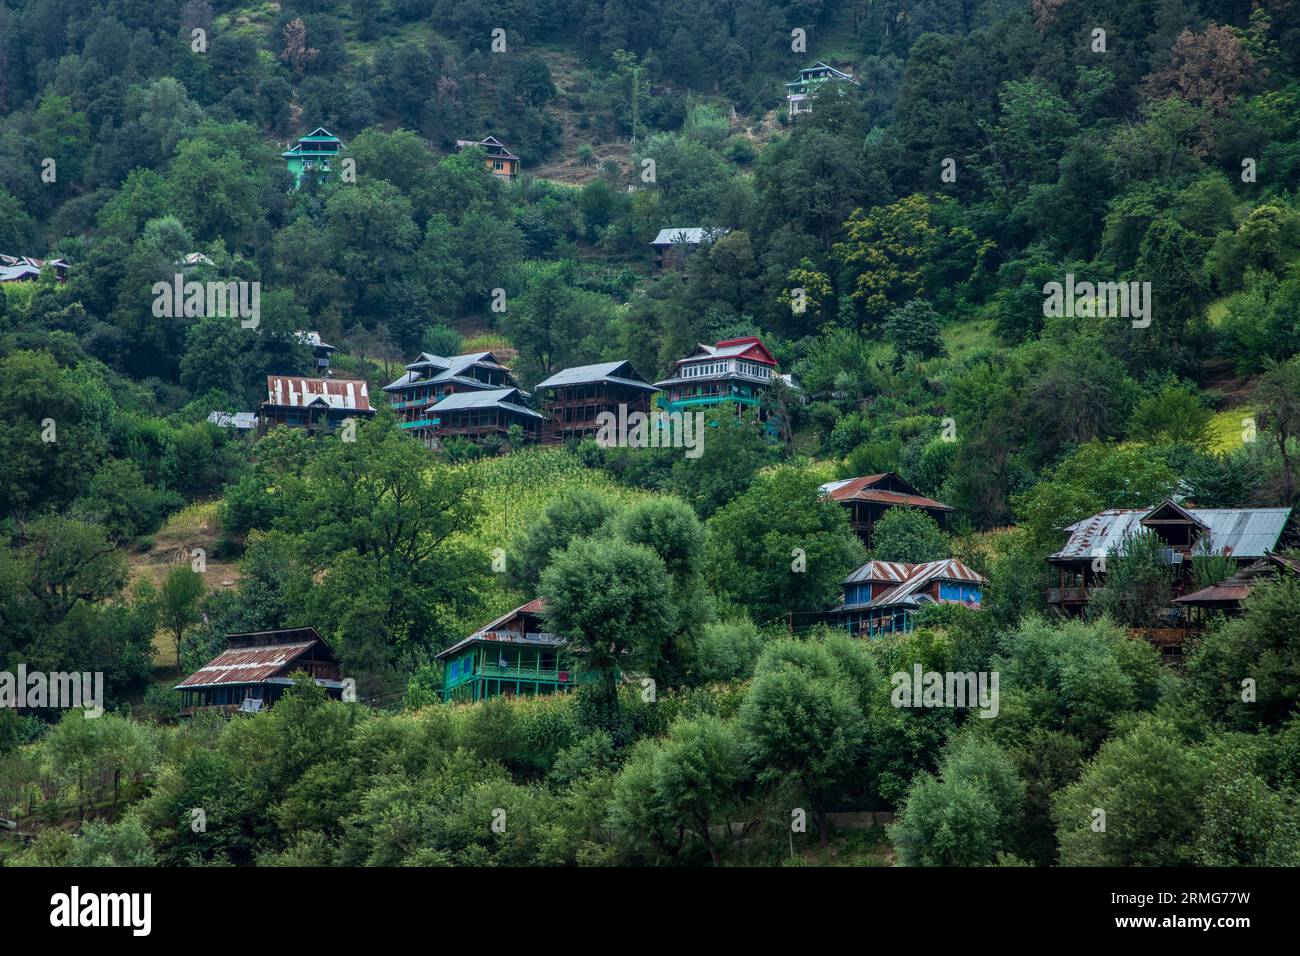 Residential houses are seen in a dense forest in Indian Administered as seen from the banks of Neelam river or Kishan Ganga that has divided Kashmir into two parts controlled by nuclear rivals India and Pakistan. The river acts as a disputed line of control and flows through a village called Keran from both sides which is located on the northern side of Indian Kashmir's Border district Kupwara some 150kms from Srinagar and 93kms from Muzaffarabad, in the Pakistan side of Kashmir. (Photo by Faisal Bashir/SOPA Images/Sipa USA) Stock Photo